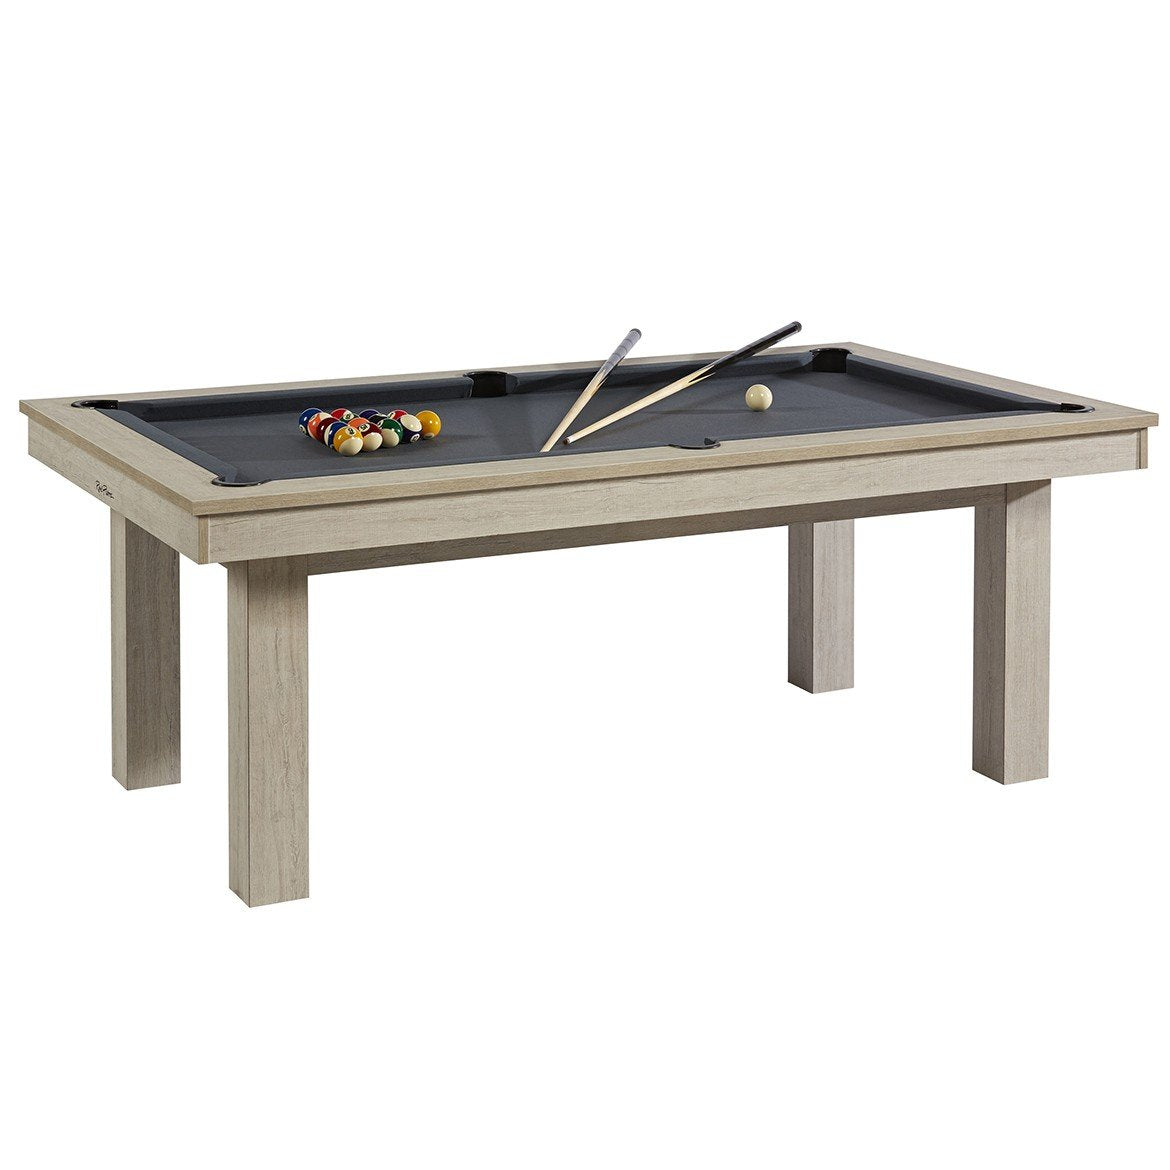 Rene Pierre Billiards Lafite oregon Pool Table with Dining Top